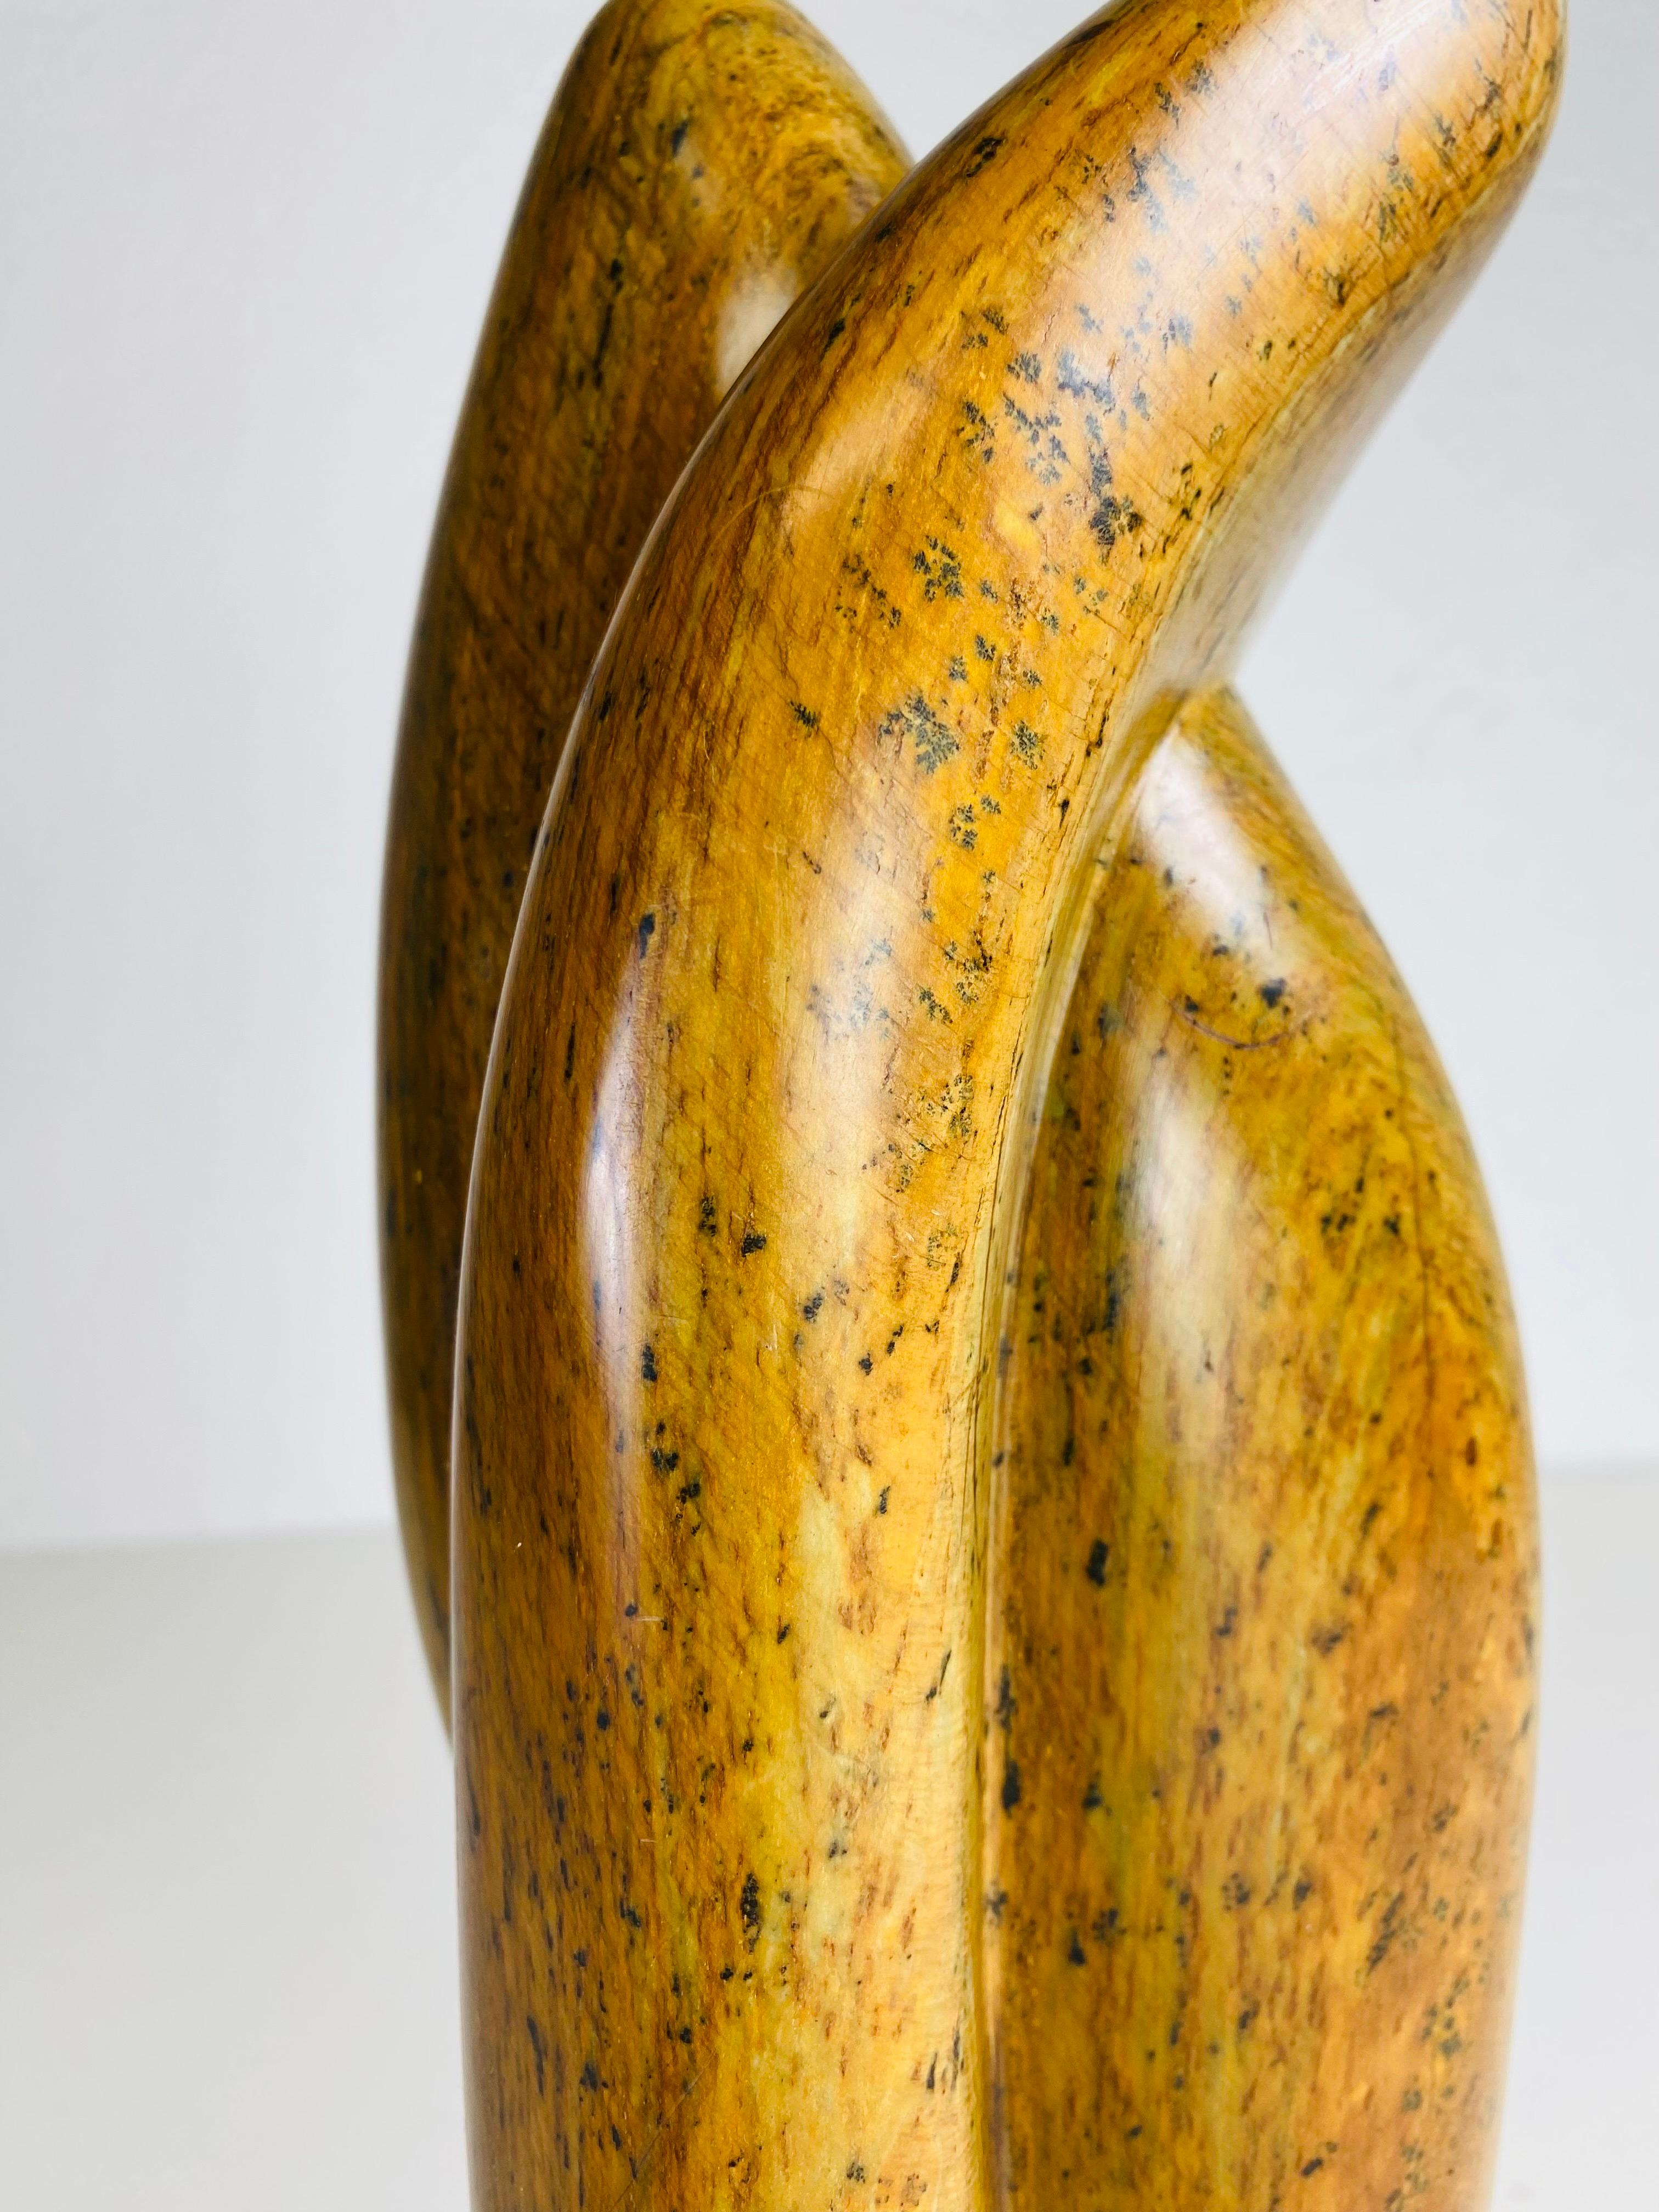 This is a mid century vintage abstract stone sculpture. This hand carved smoothly polished amber stone stands on a Lucite plinth. This stone sculpture has beautiful tones of amber, dark brown and black throughout the sculpture. The sculpture is